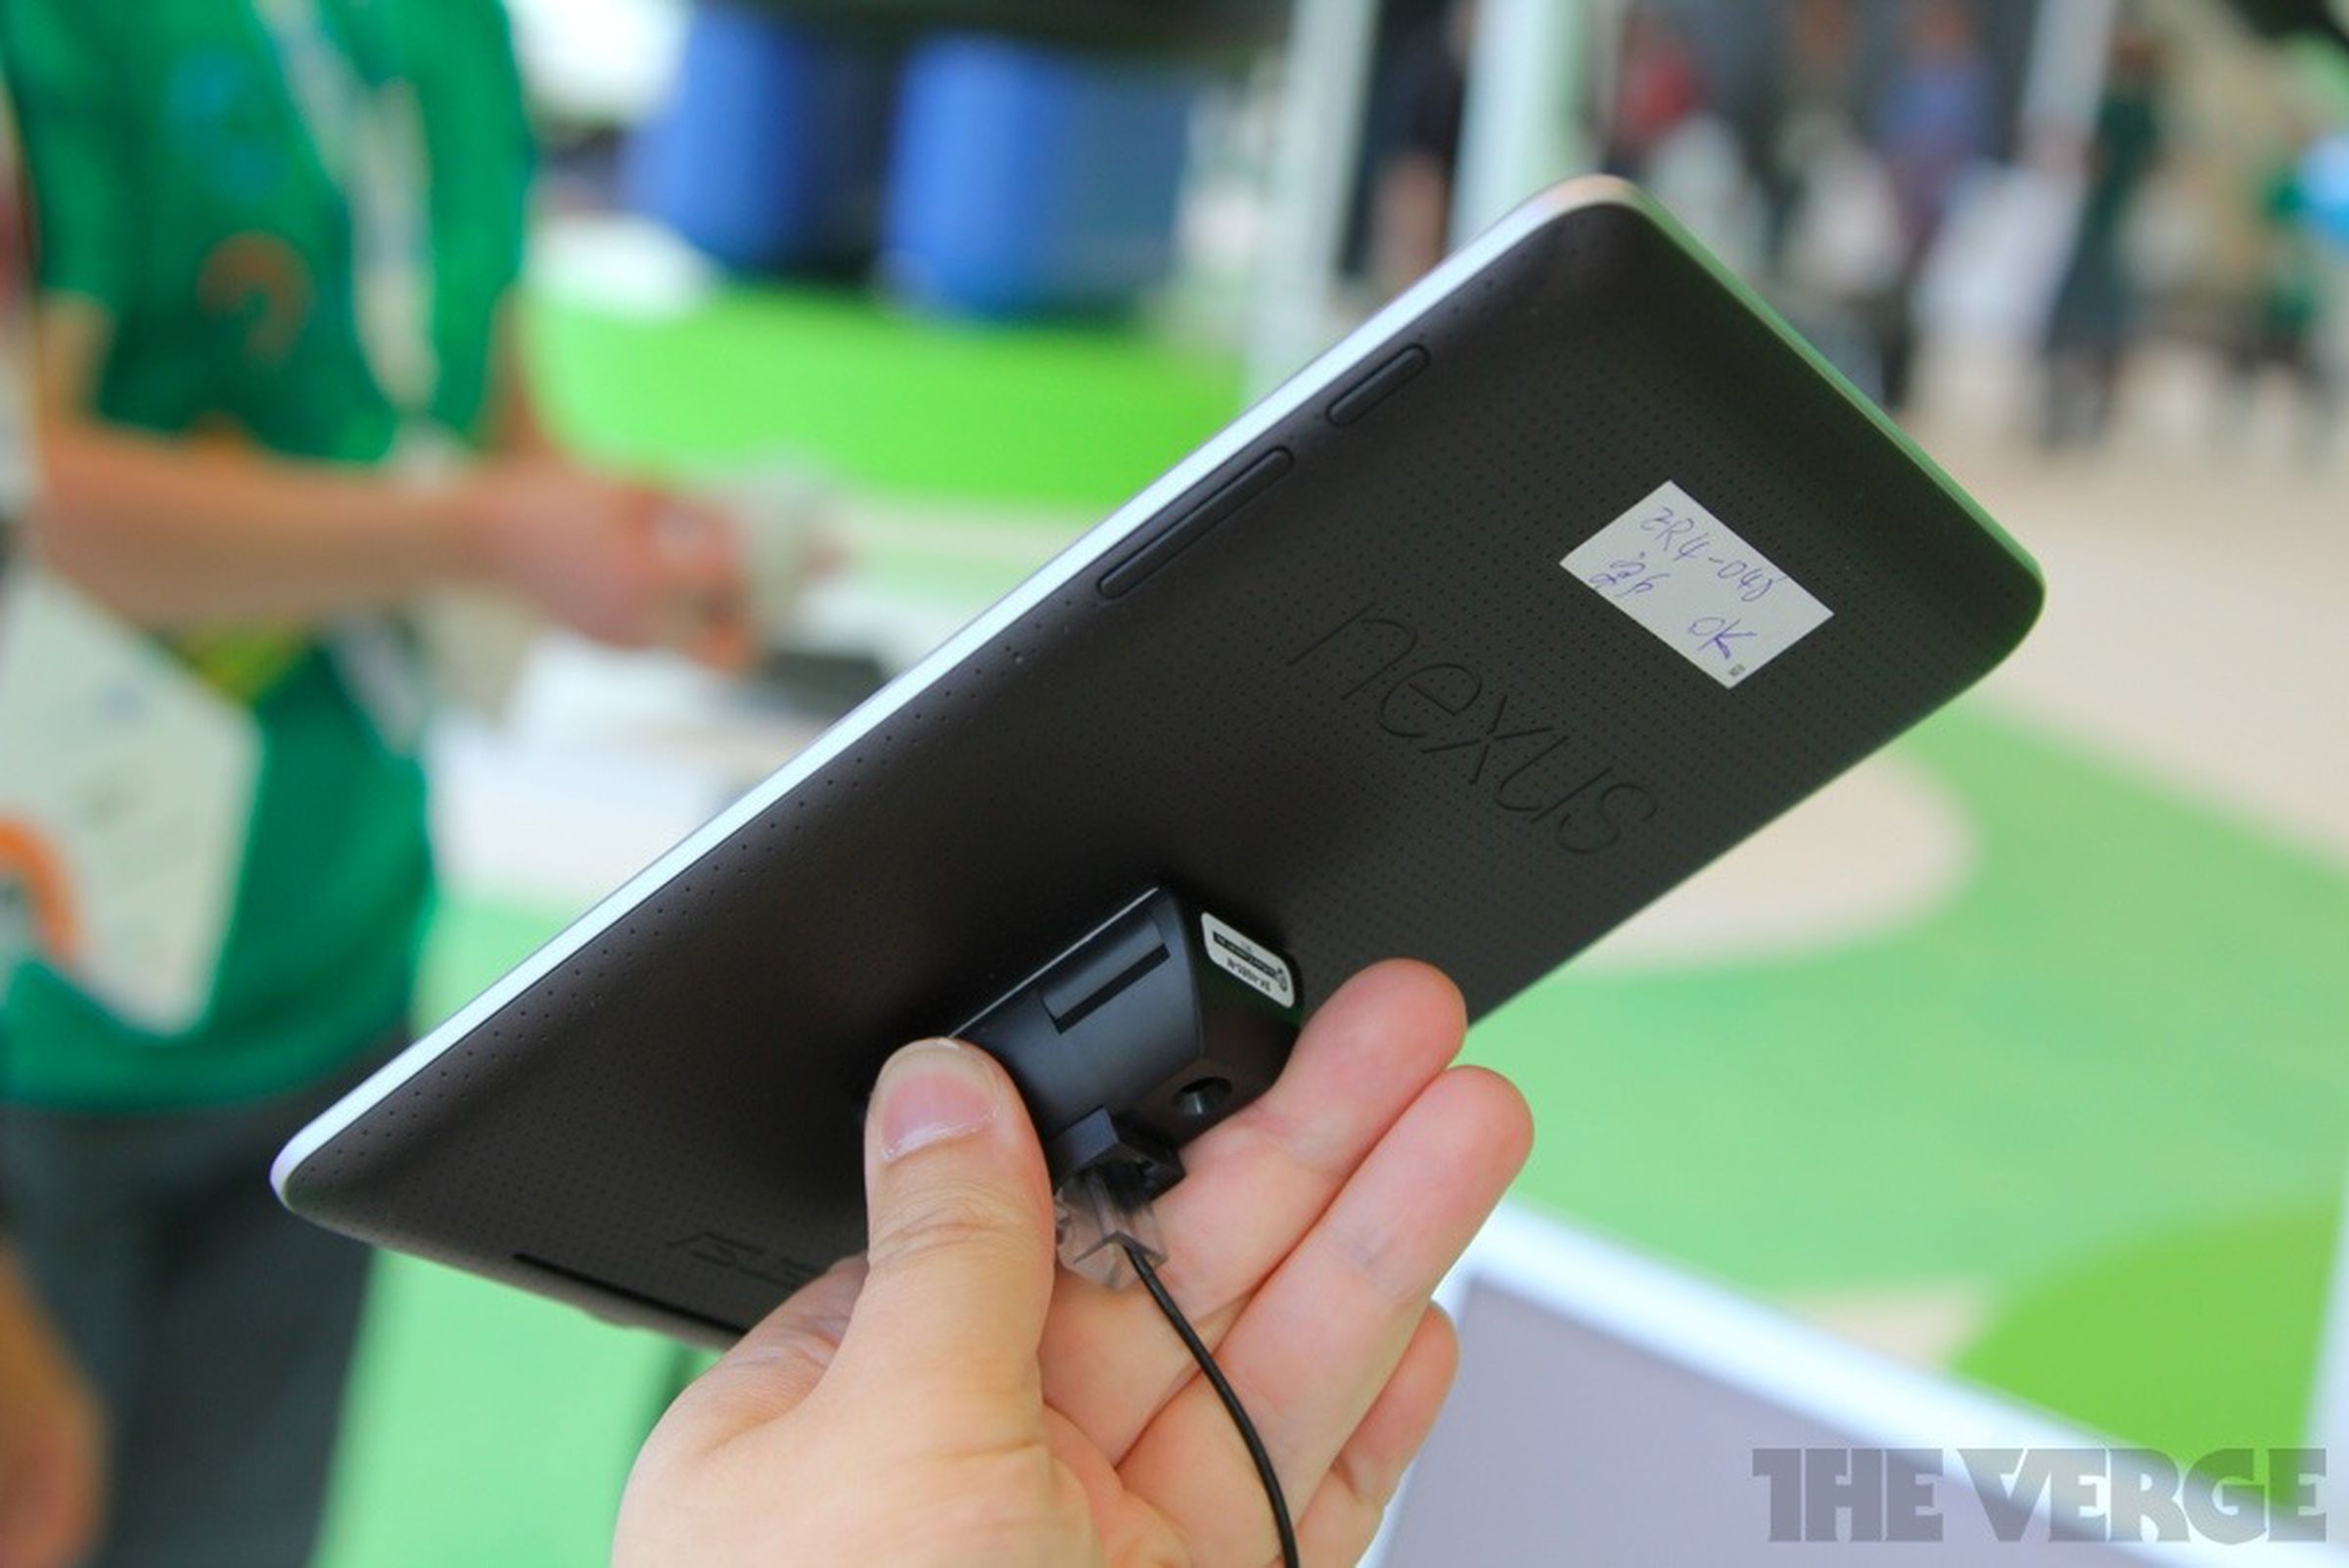 Google Nexus 7 by Asus hands-on pictures